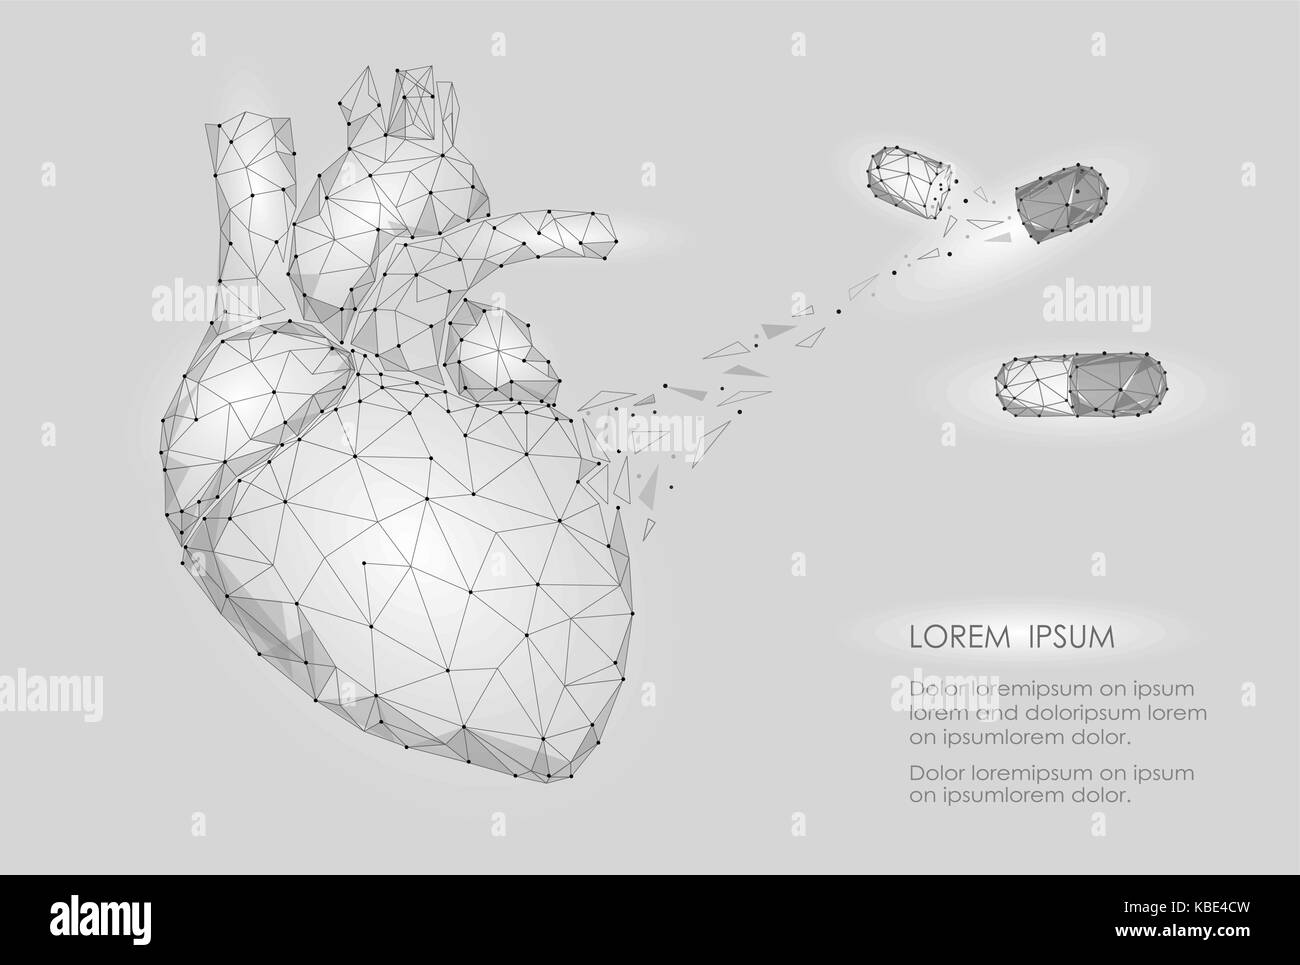 Human Heart Medicine Treatment Drug Internal Organ Triangle Low Poly. Connected dots white gray neutral color technology 3d model medicine healthy bod Stock Vector